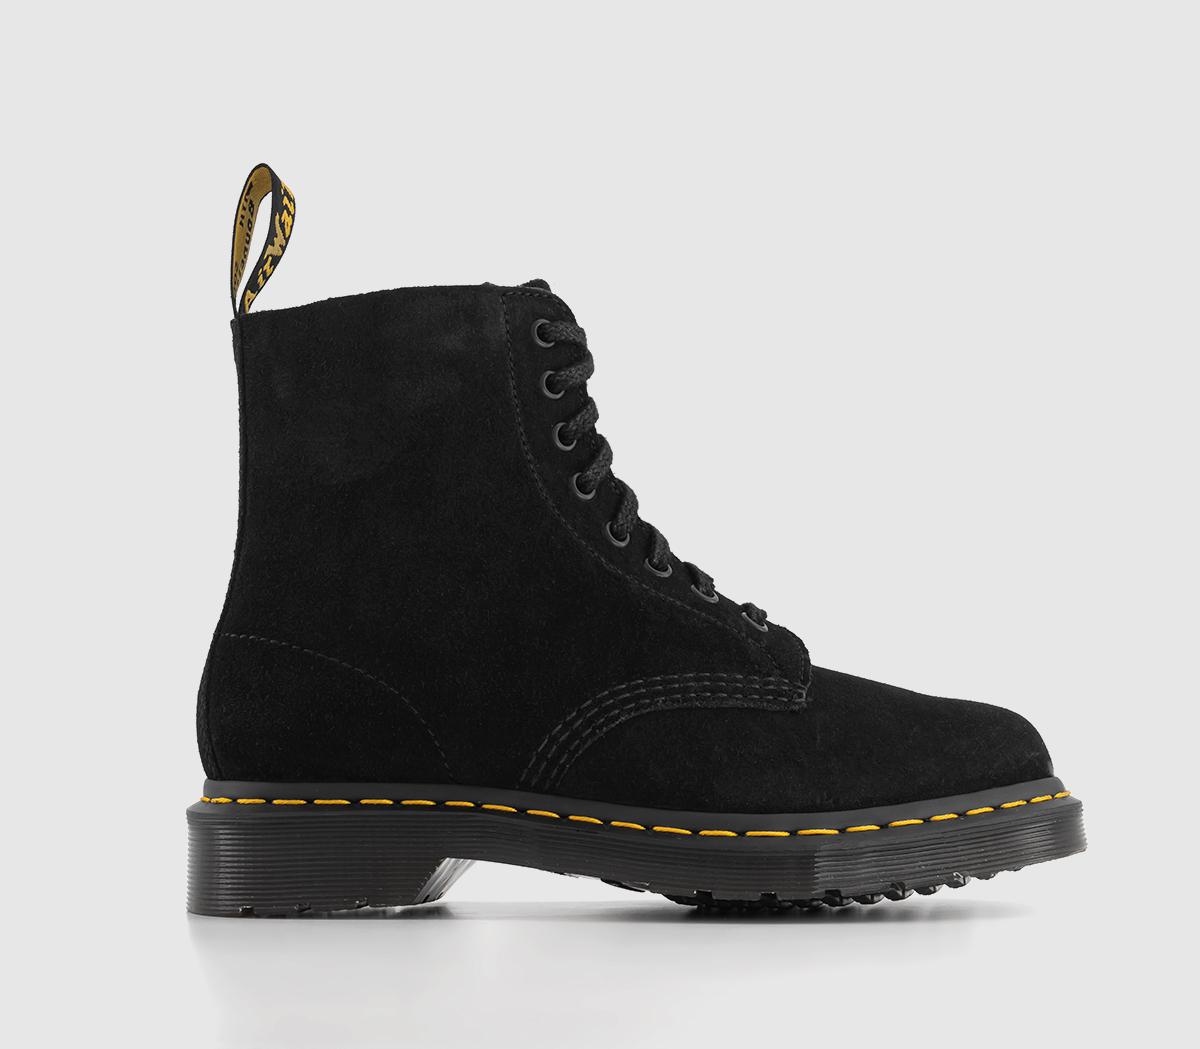 8 Eyelet Lace Up Boots Black Eh Suede